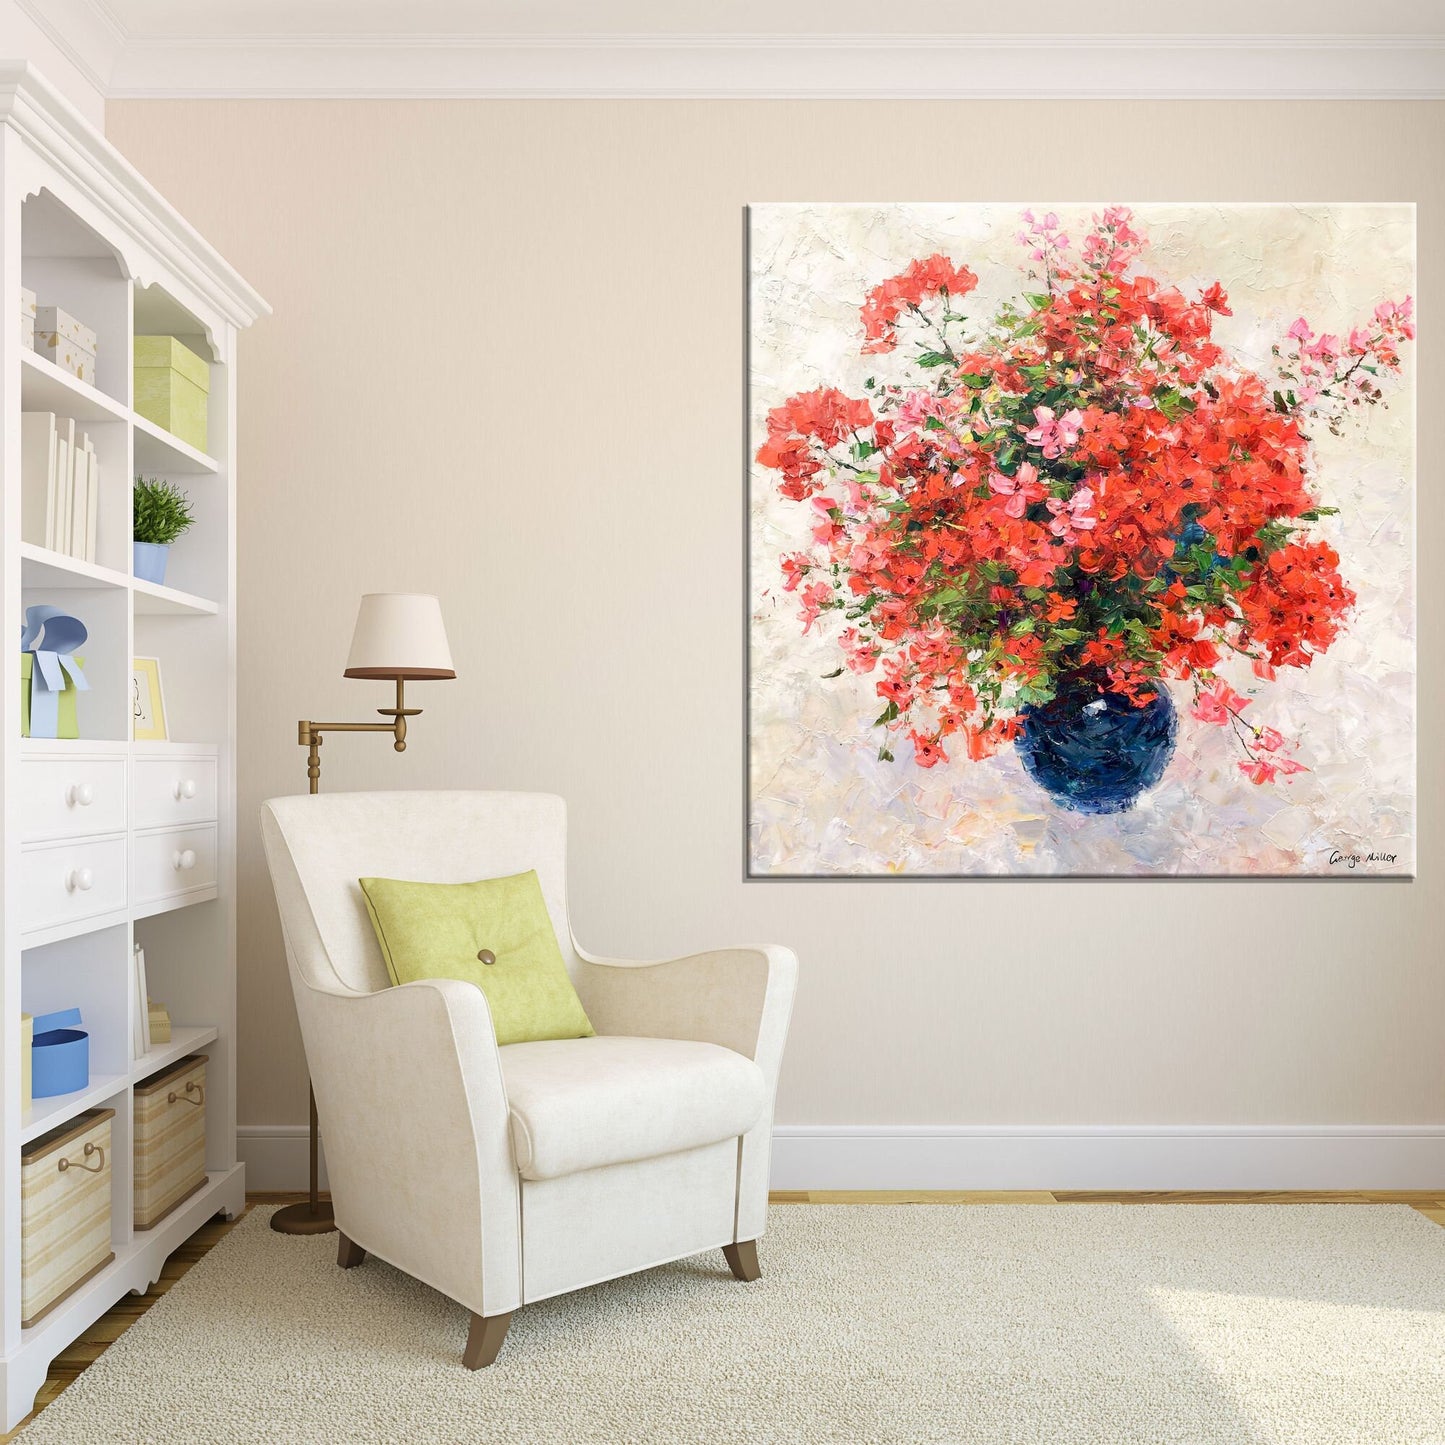 Floral Painting, Canvas Art, Large Wall Decor, Large Abstract Art, Original Oil Painting, Oil Painting Red Flowers, Living Room Wall Decor